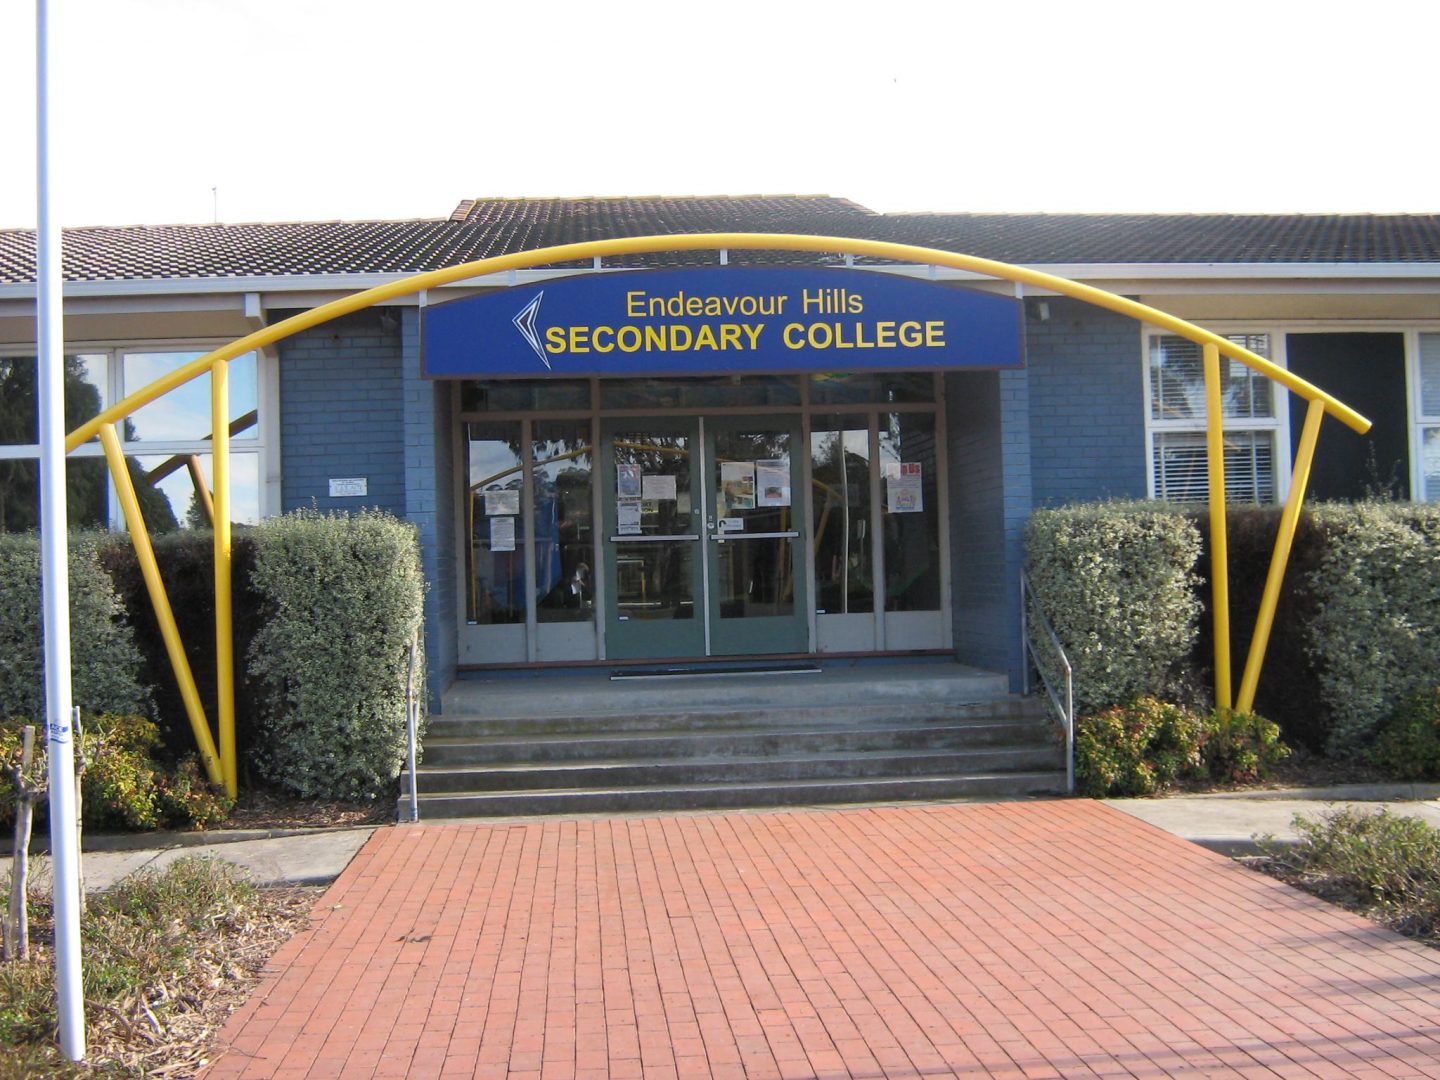 Endeavour Hills Secondary College then